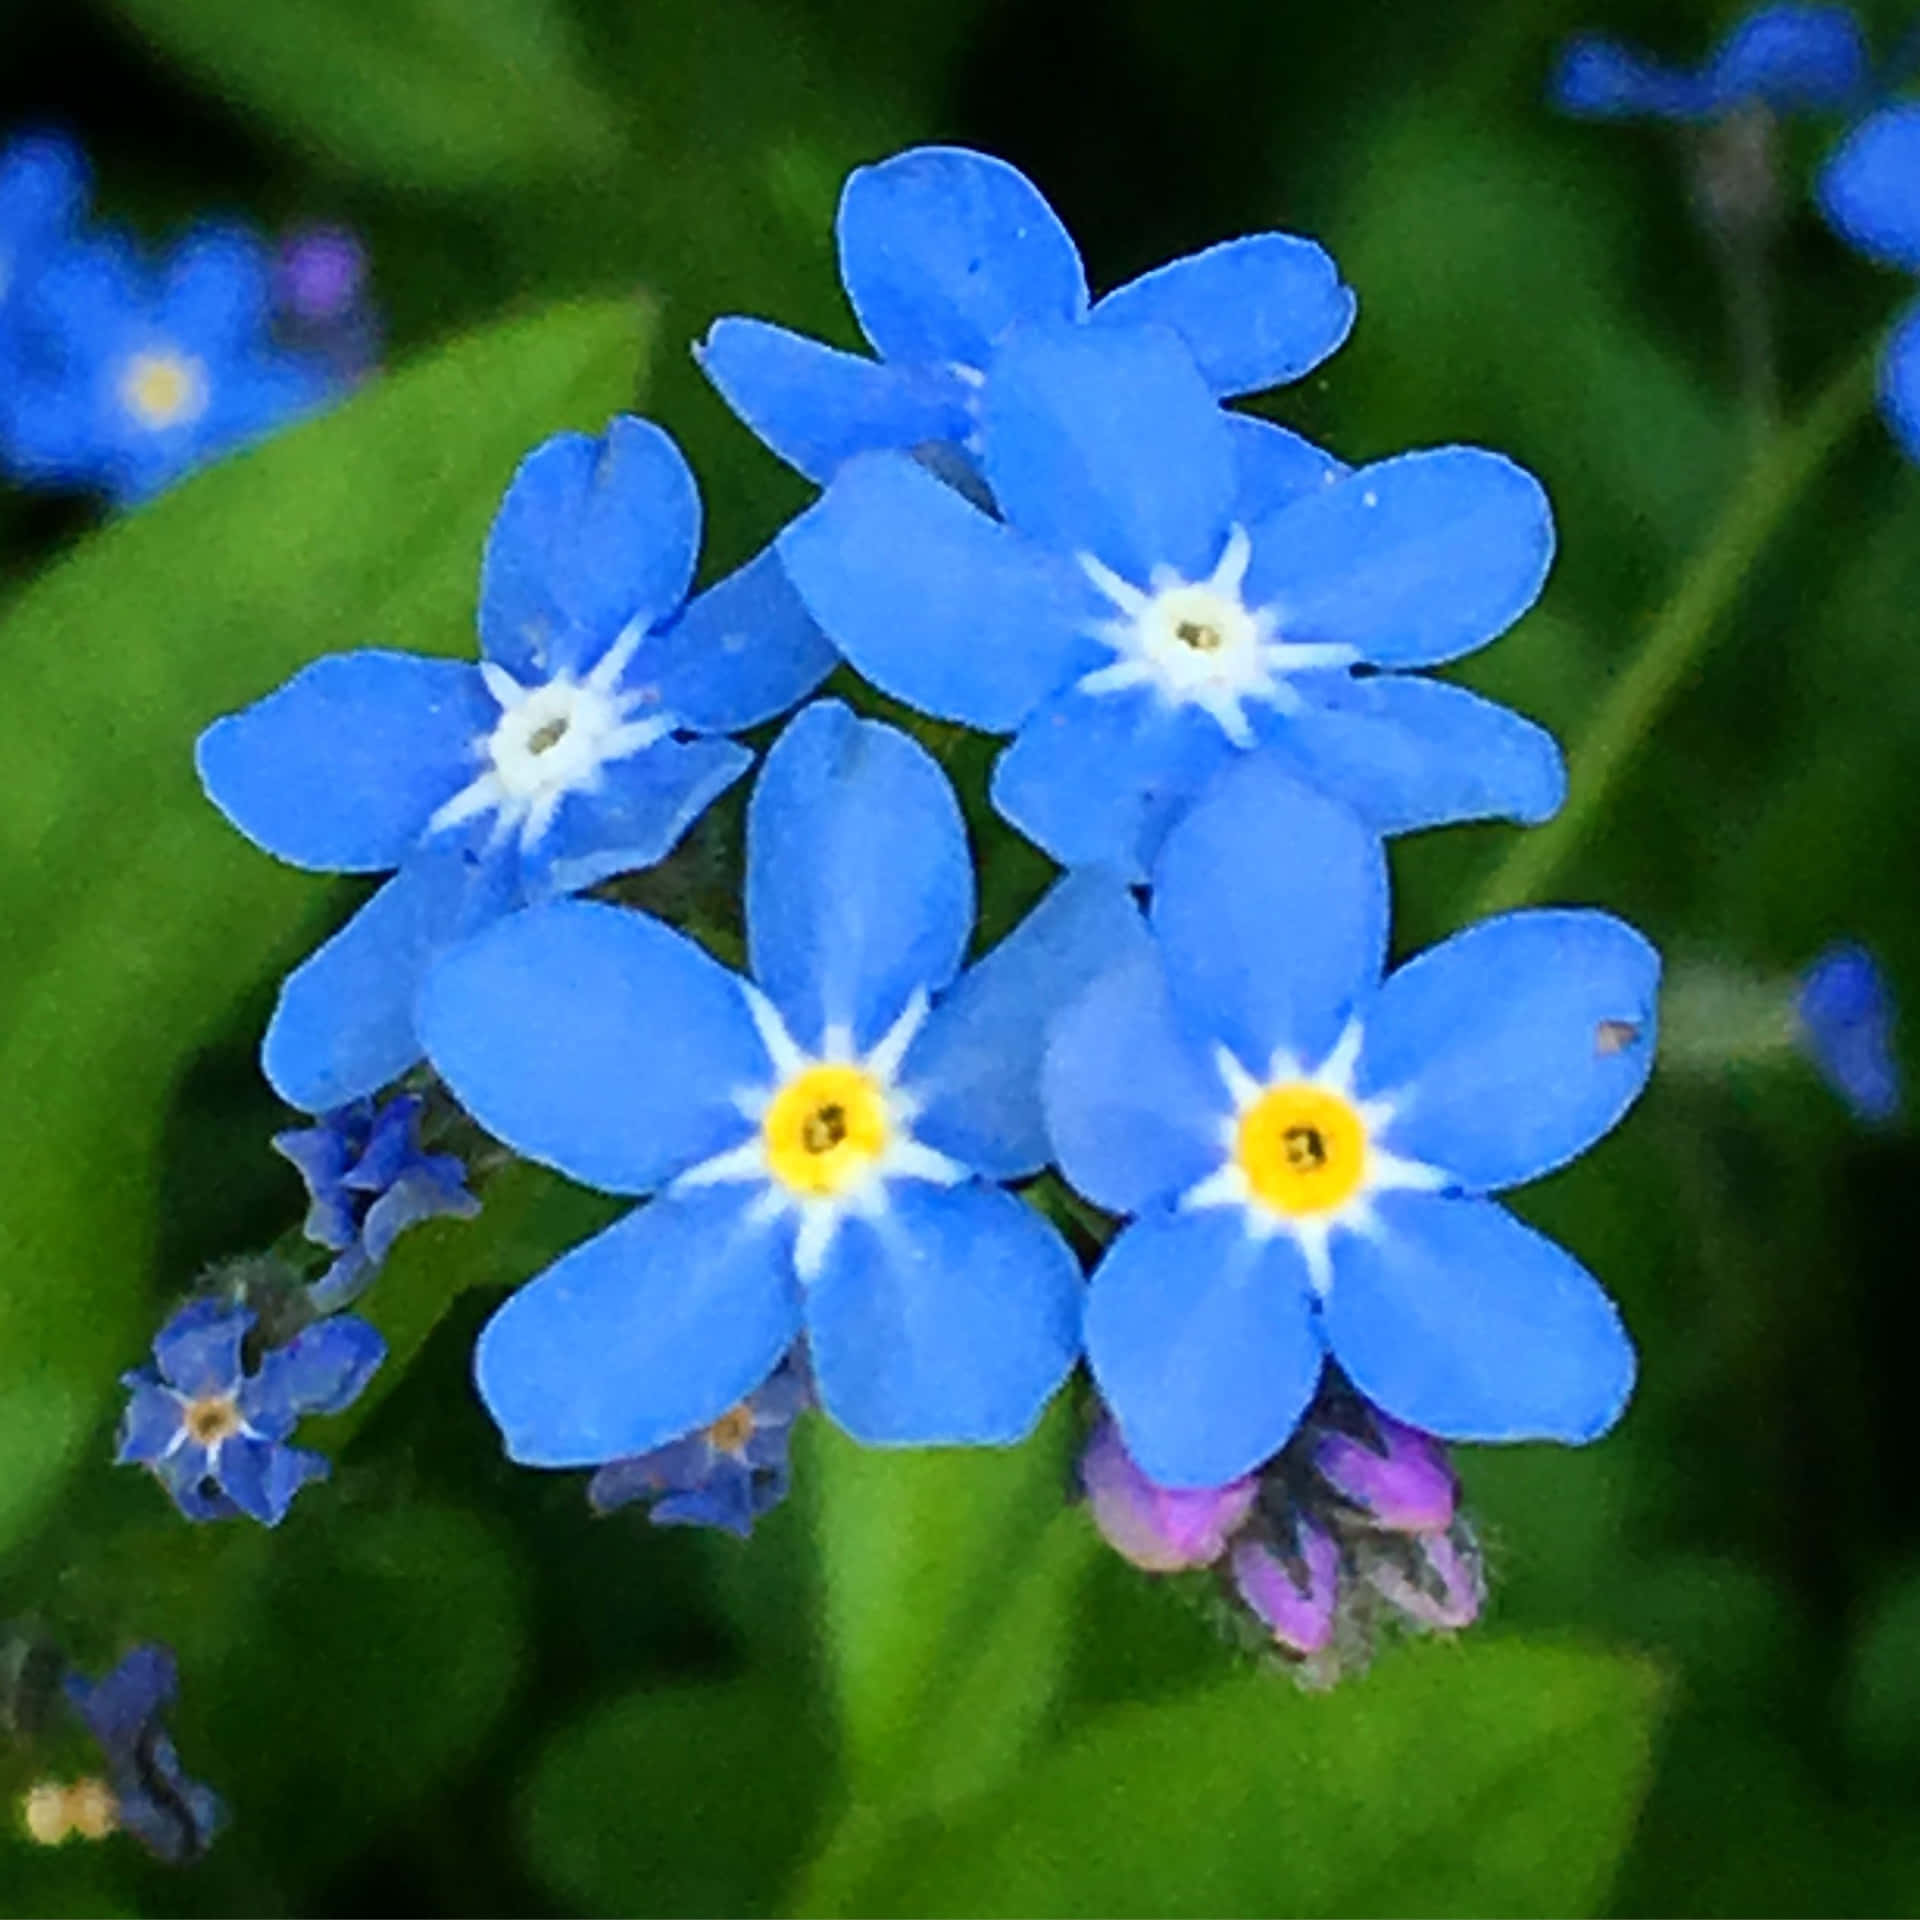 A cheerful blue Forget Me Not flower symbolizing lasting love and memories.